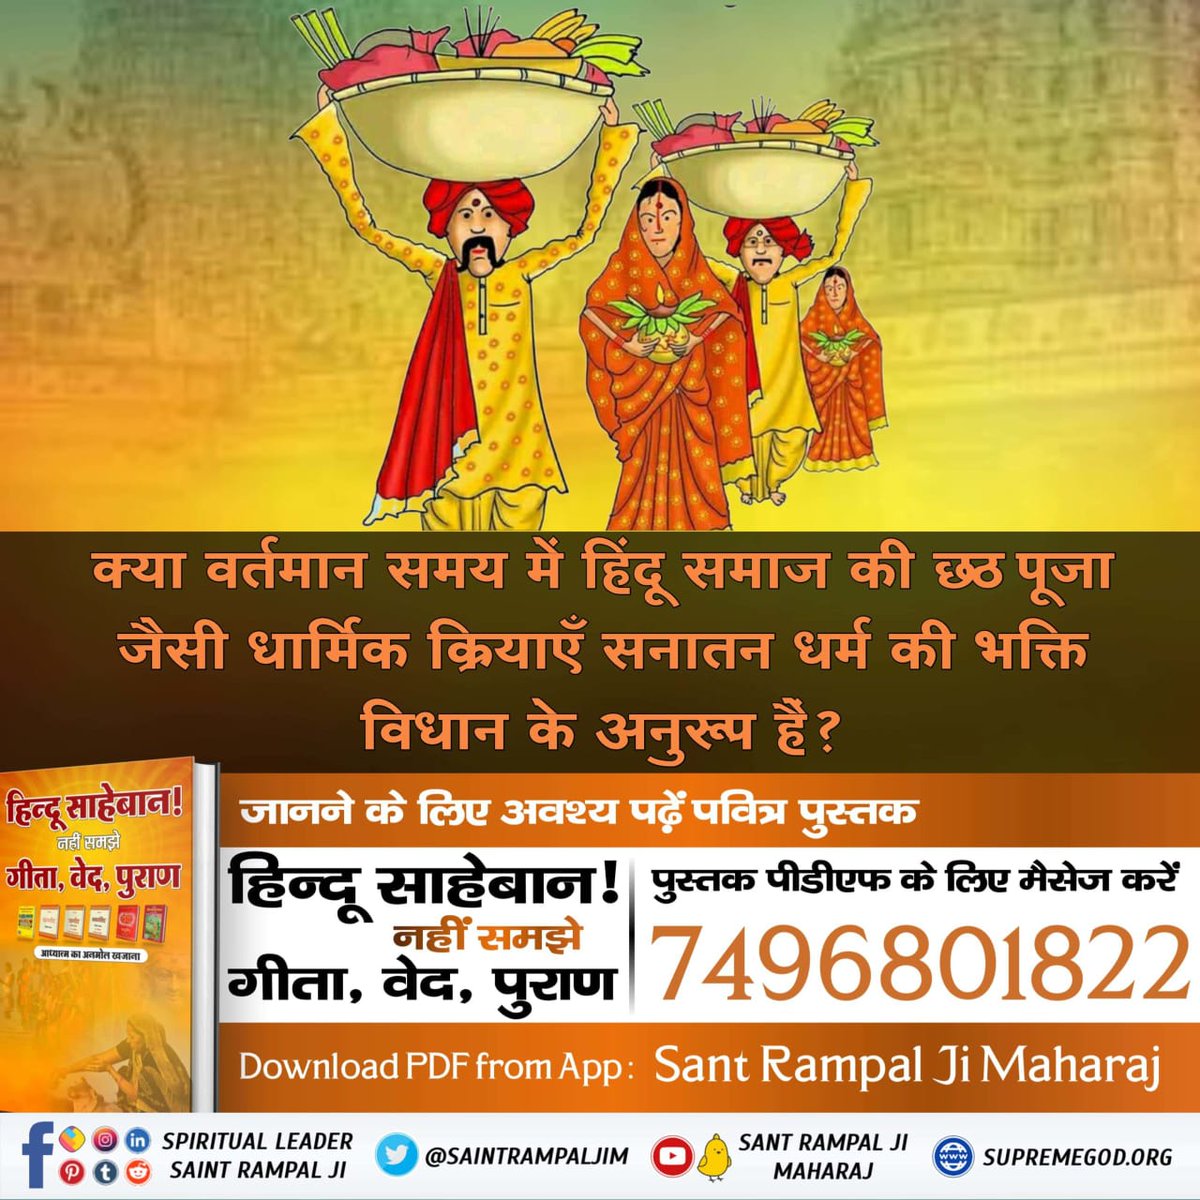 #GodNightFriday
Are the present-day religious activities like Chhath Puja in Hindu society in accordance with the devotional practices of Sanatan Dharma❓
👉For more information visit our website: JagatguruRampalji.org